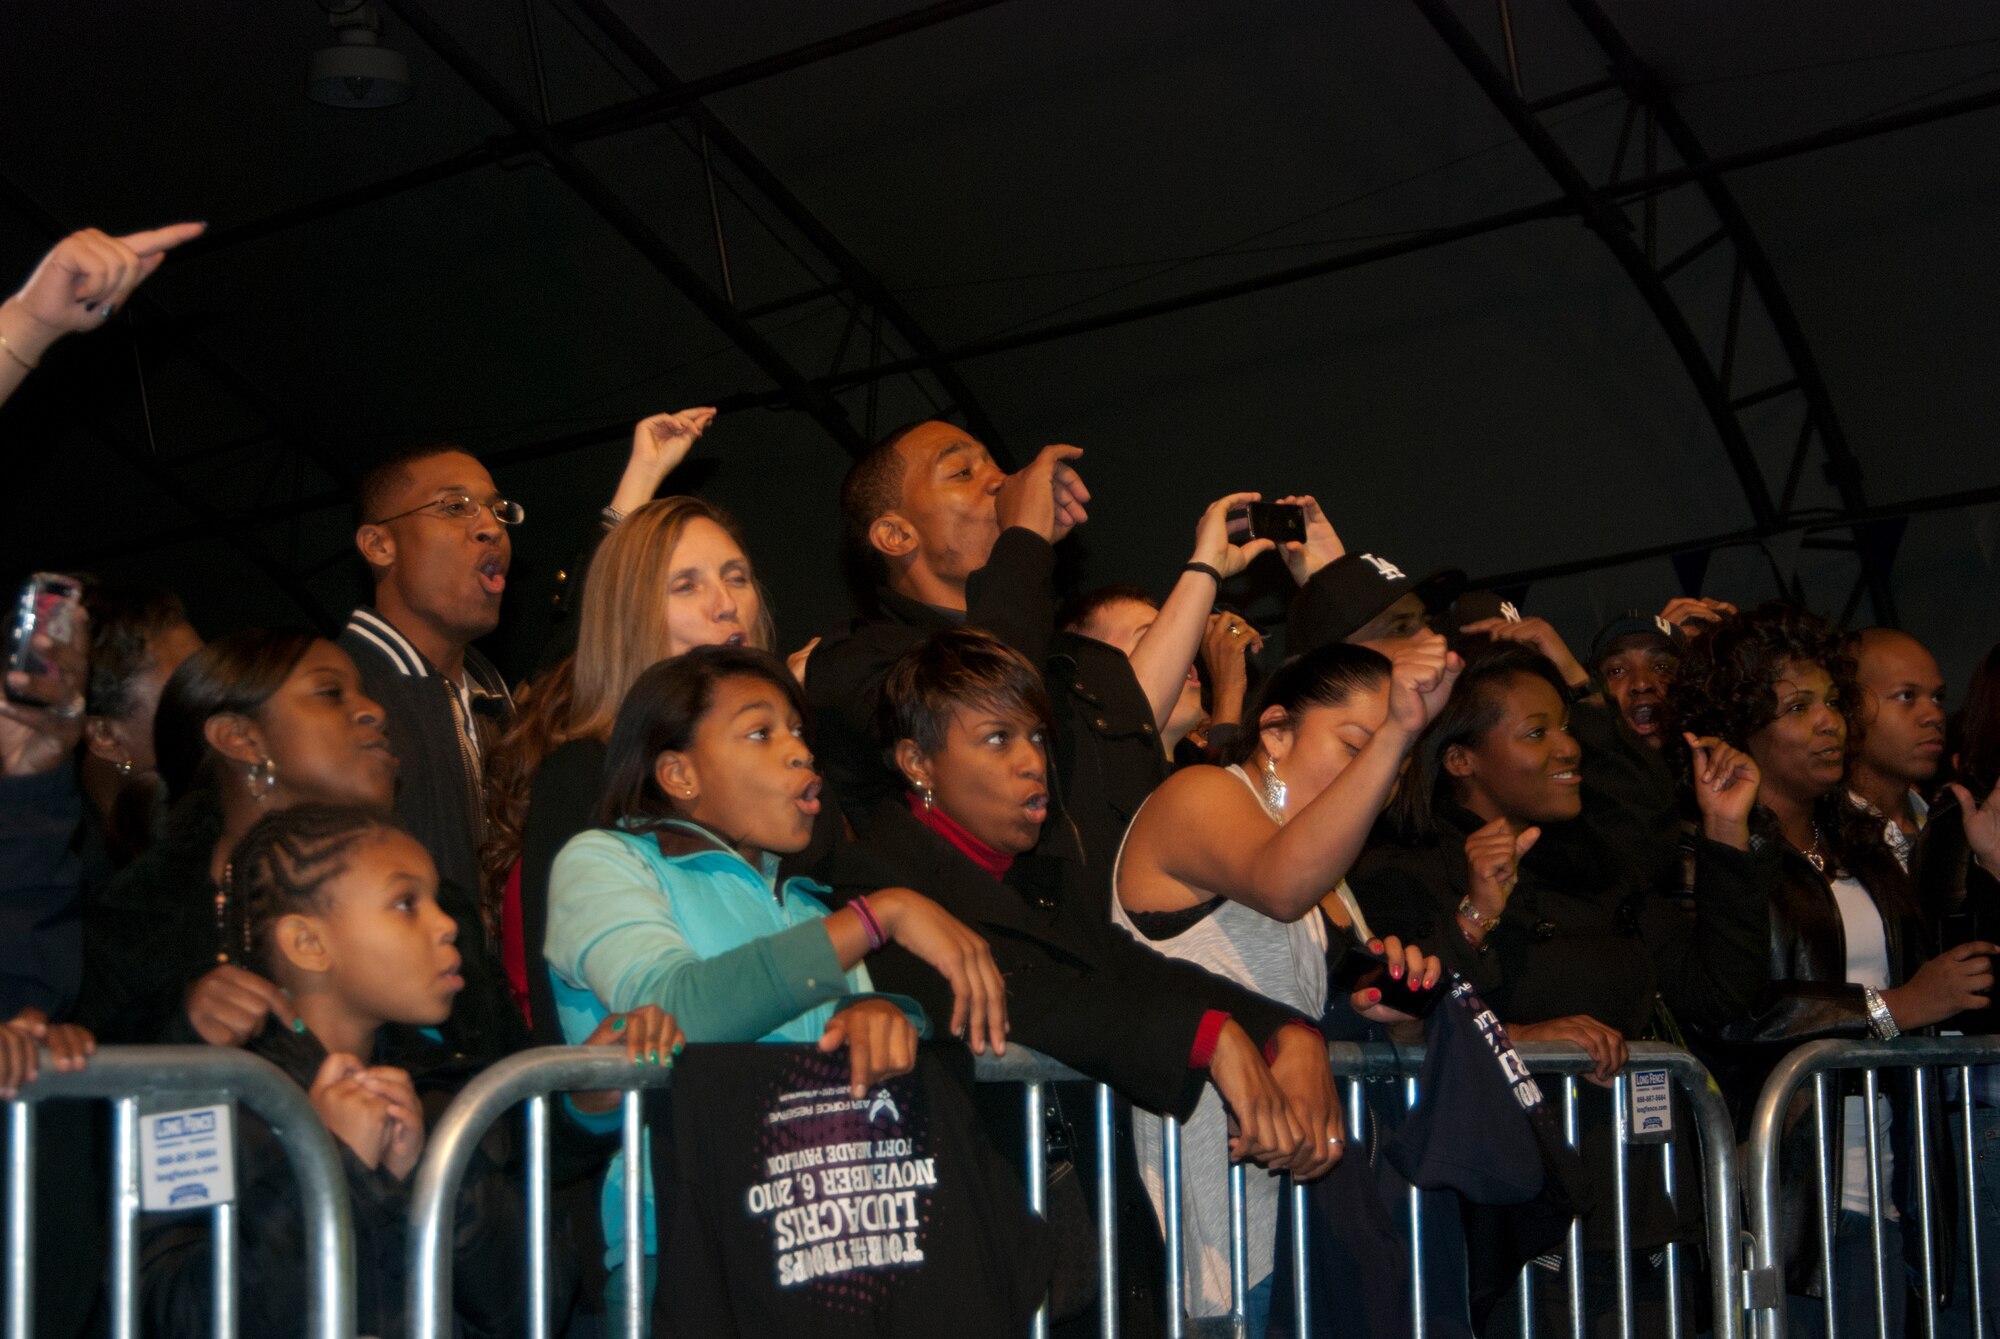 FORT MEADE, Md. -- Grammy-winning rapper, Ludacris, backed up by vocals from fellow rapper, Lil Fate, performs for a crowd of over 1,000 servicemembers, federal employees, friends and family at the Fort Meade Pavilion here Nov 6.  Ludacris partnered with Air Force Reserve Command Recruiting Service and Blaine Warren Advertising to host a special event for servicemembers and potential Air Force Reservists as part of the recruiting service's initiative, "Get 1 Now - Refer a Friend Tour."   In order to reach potential new Reservists, Reserve recruiting is bringing popular music artists to perform for servicemembers and others who participate in the recruiting campaign.  The next scheduled event in this area is Usher on Dec. 17. (U.S. Air Force photo/ Capt. Rebecca A. Garcia)